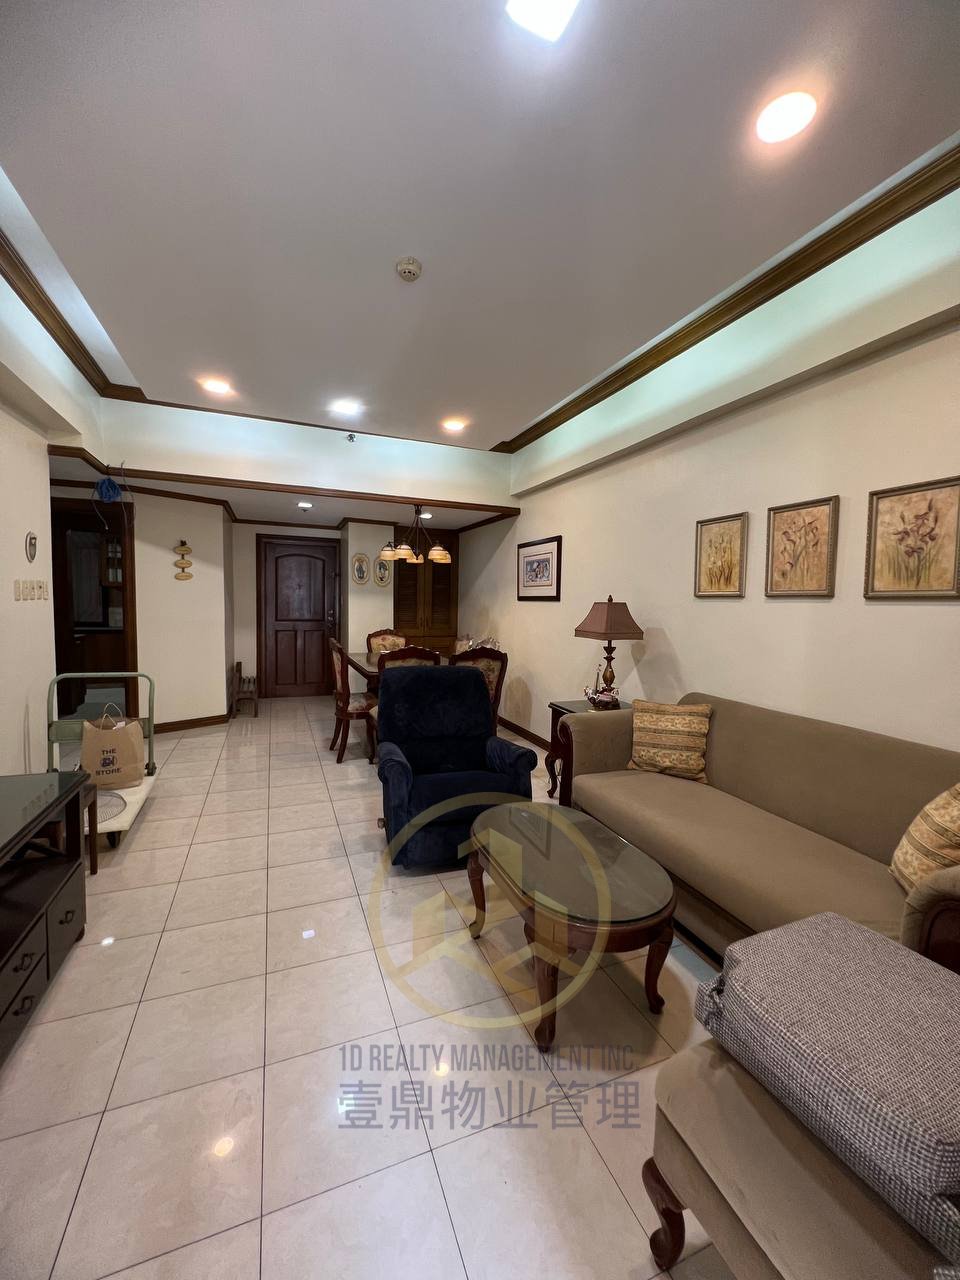 Paseo Parkview Suites - Salcedo Village, 142 Valero, Makati City - FOR LEASE